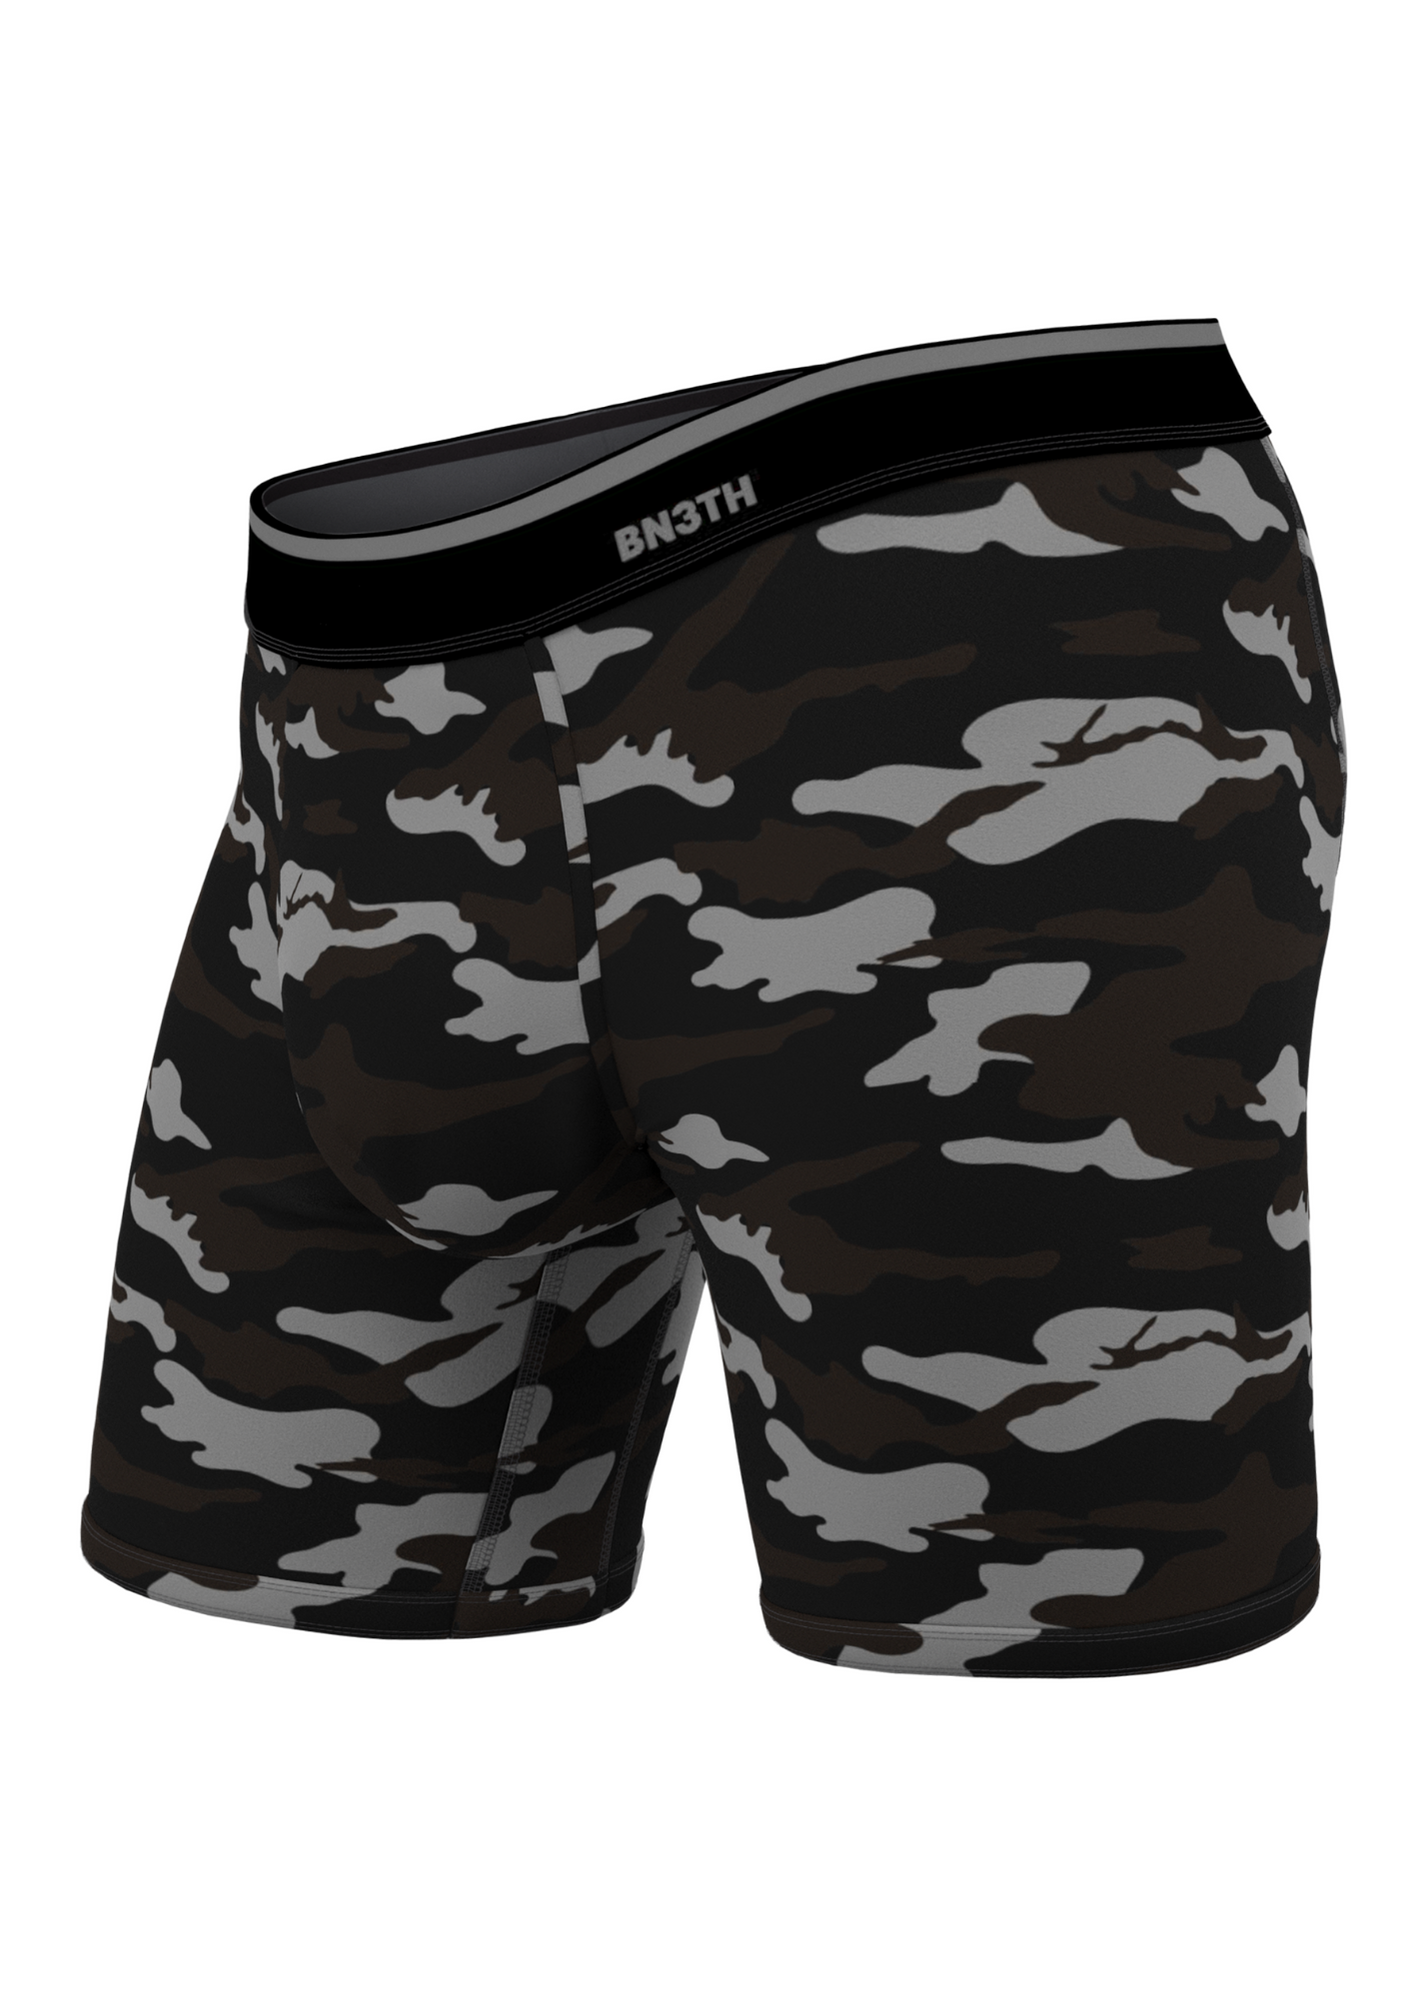 BN3TH Boxer Briefs with Black and Grey Camo Pattern